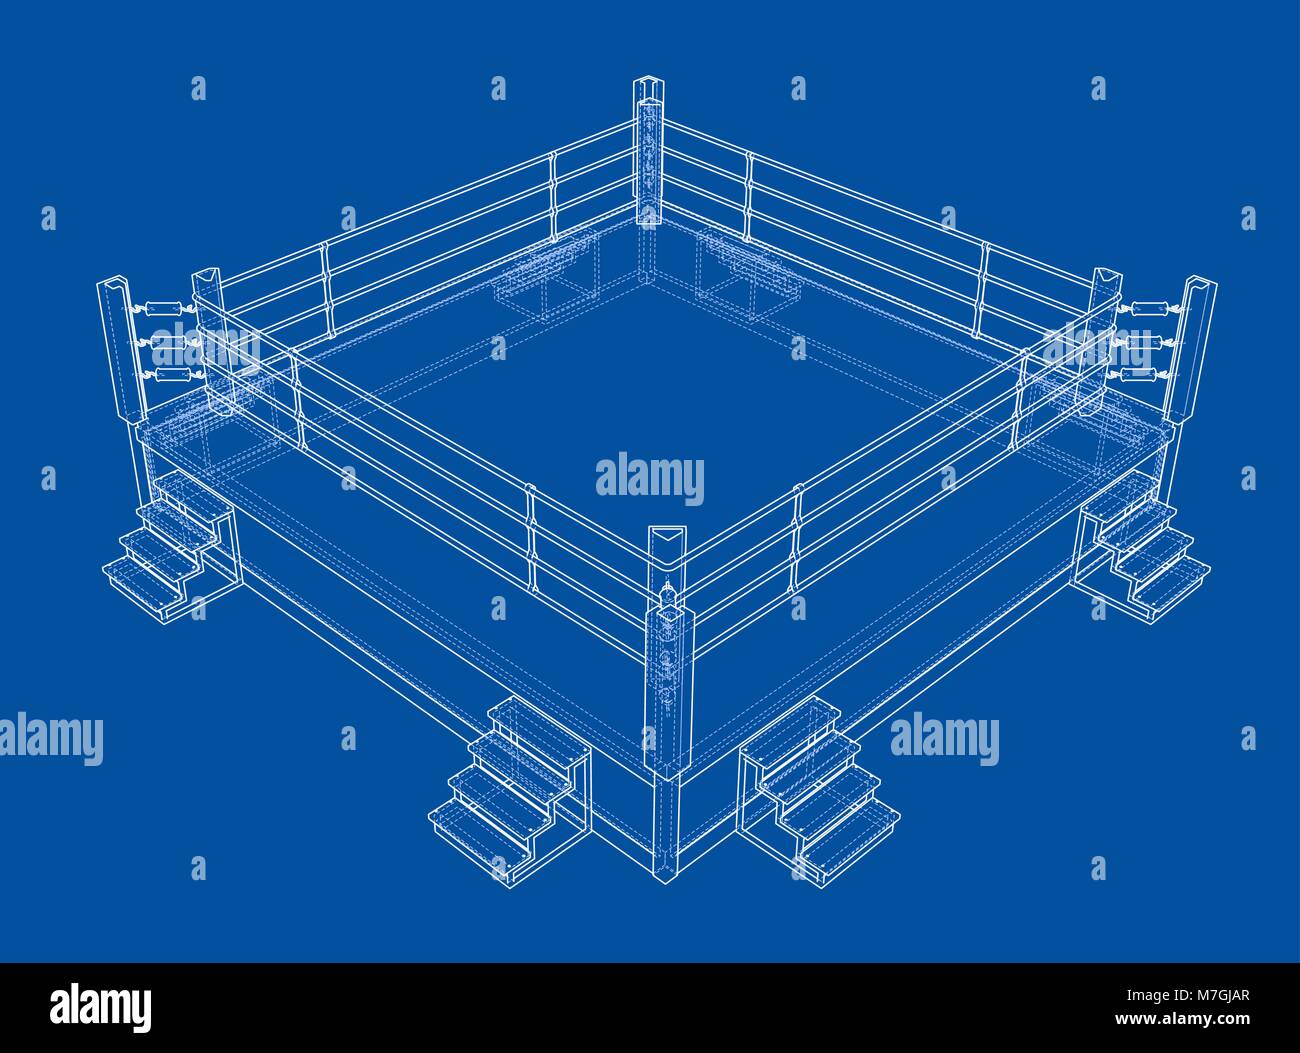 How To Draw A Boxing Ring Step By Step